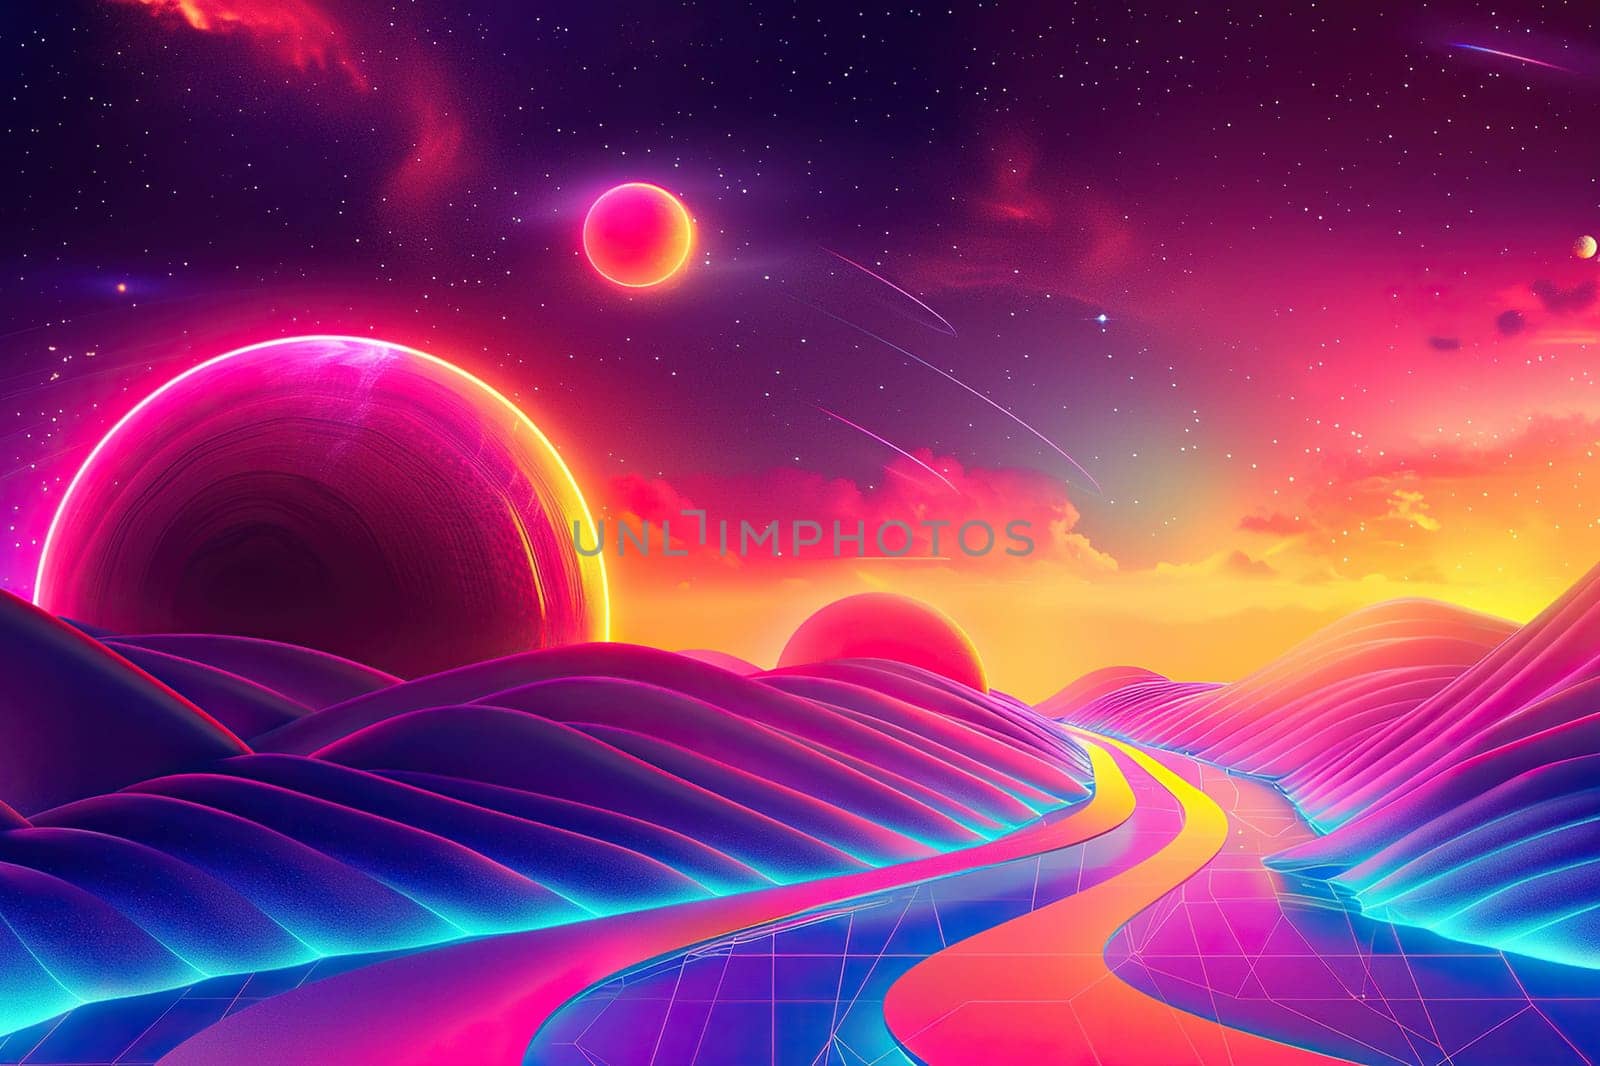 Retro Futuristic landscape from another planet with neon sunset, grid, mountains in 80s style. Generated by artificial intelligence by Vovmar